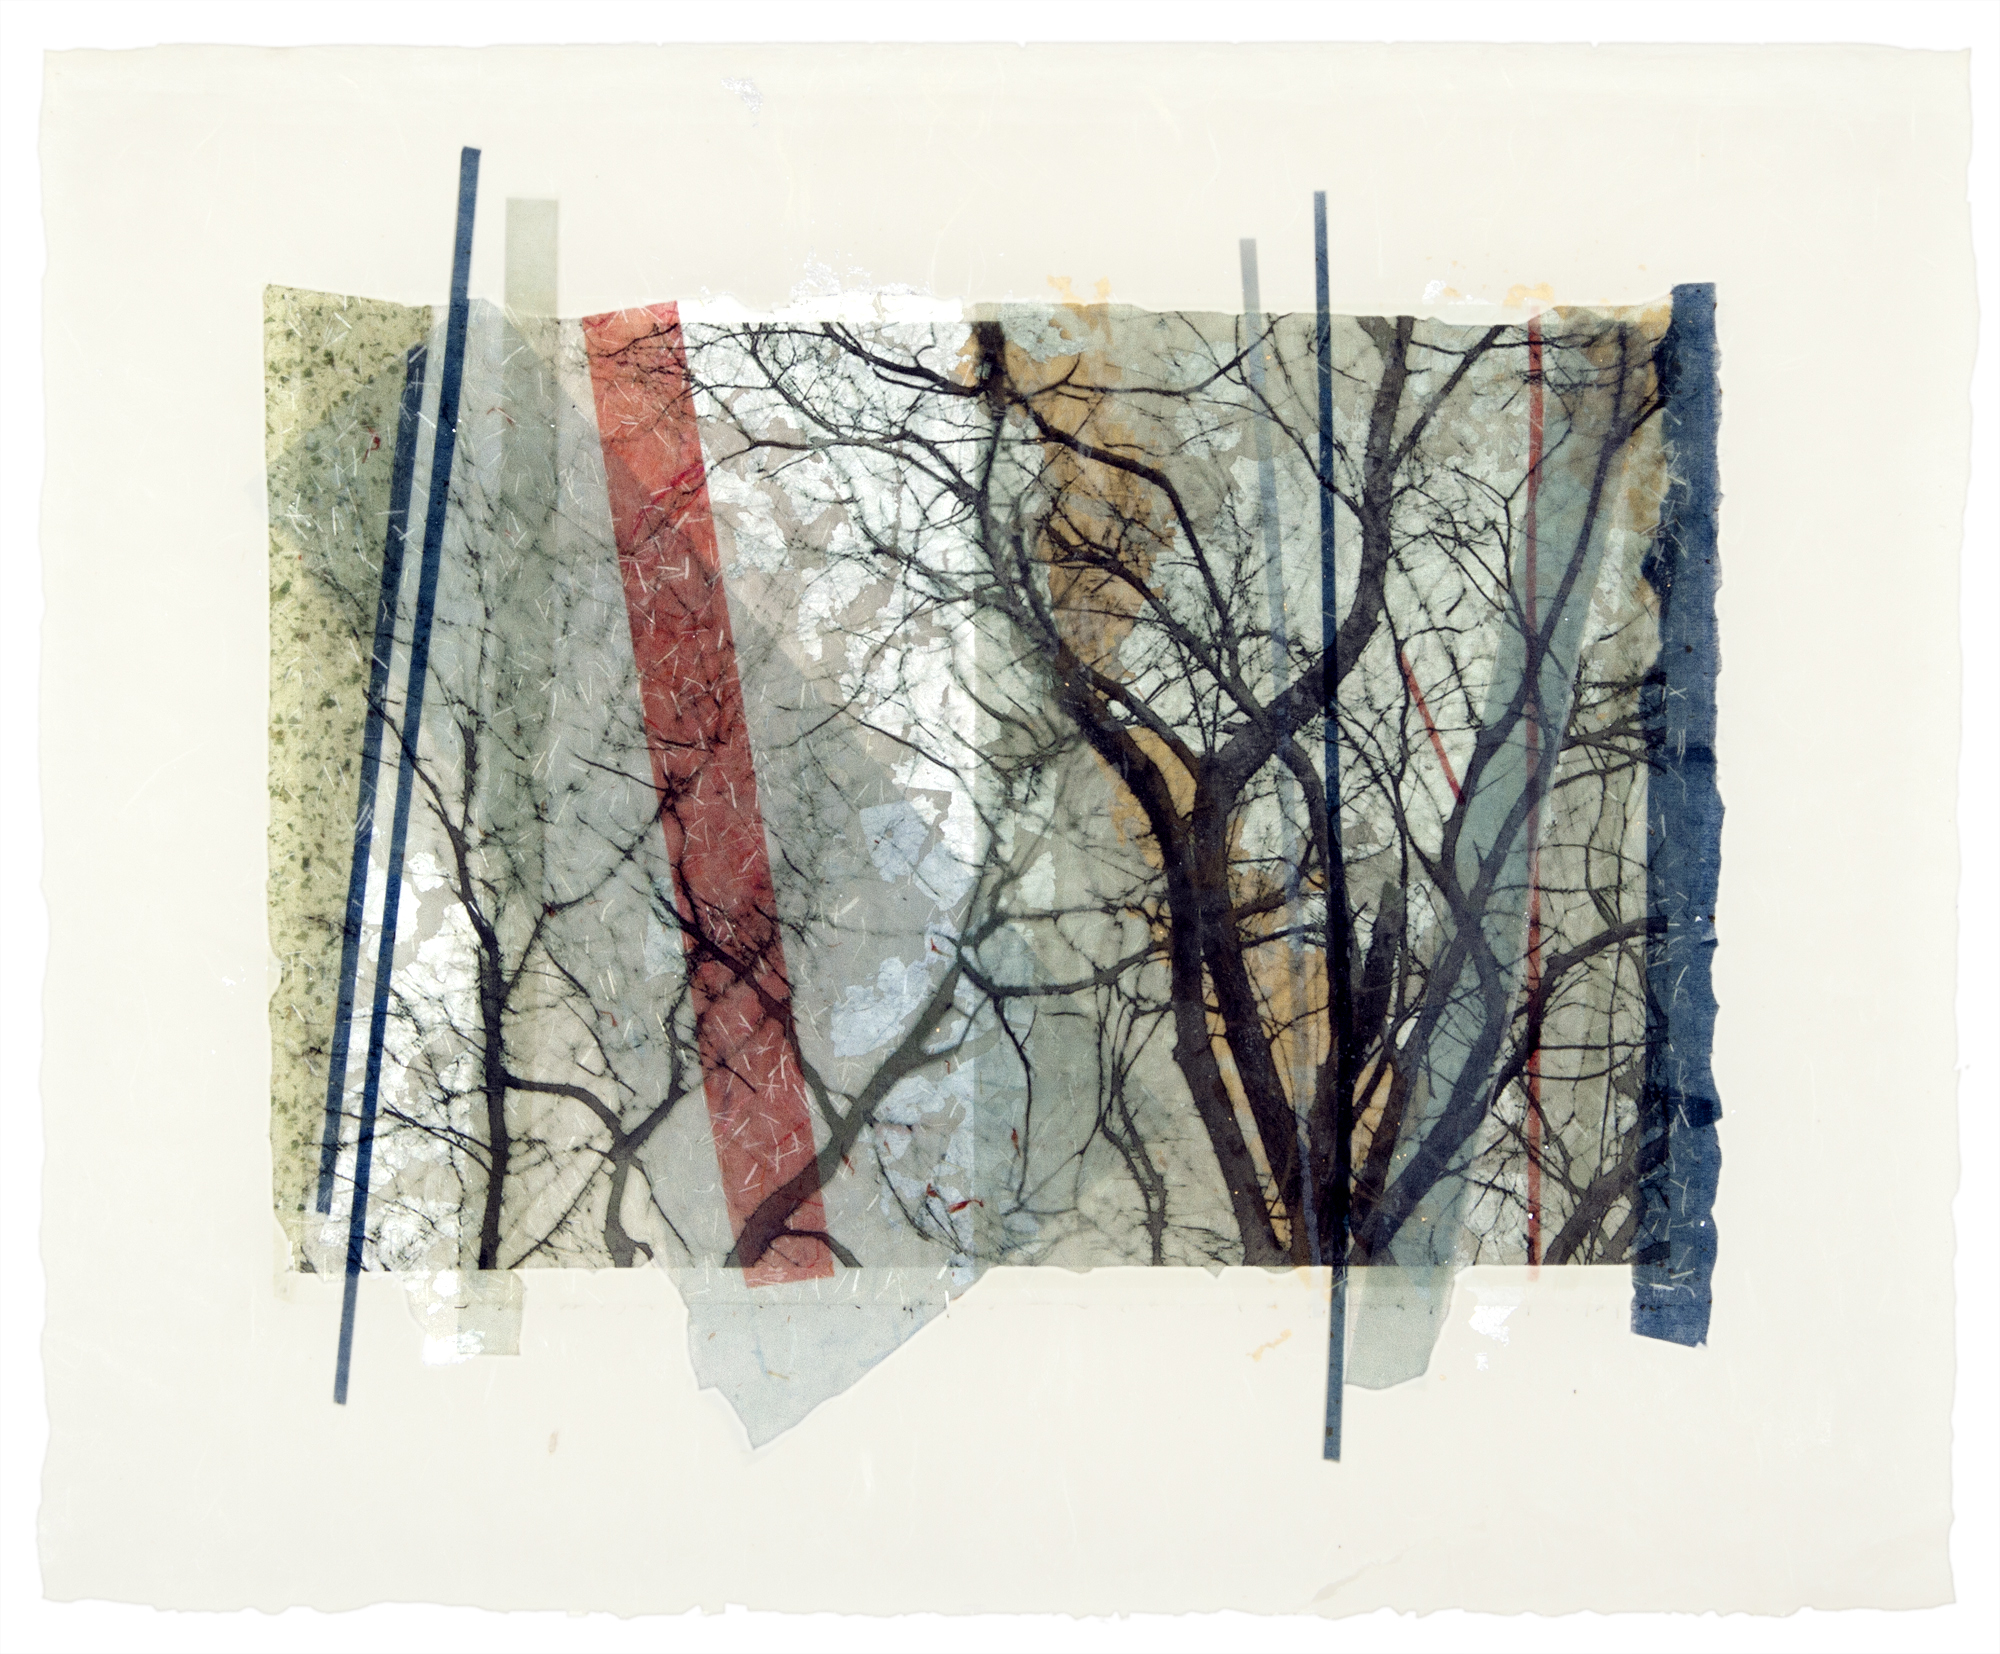   Reflected Trees , Long Island, NY, 2014  Ink jet print on Japanese rice paper, rice papers, silver leaf, wax  18” x 23” 